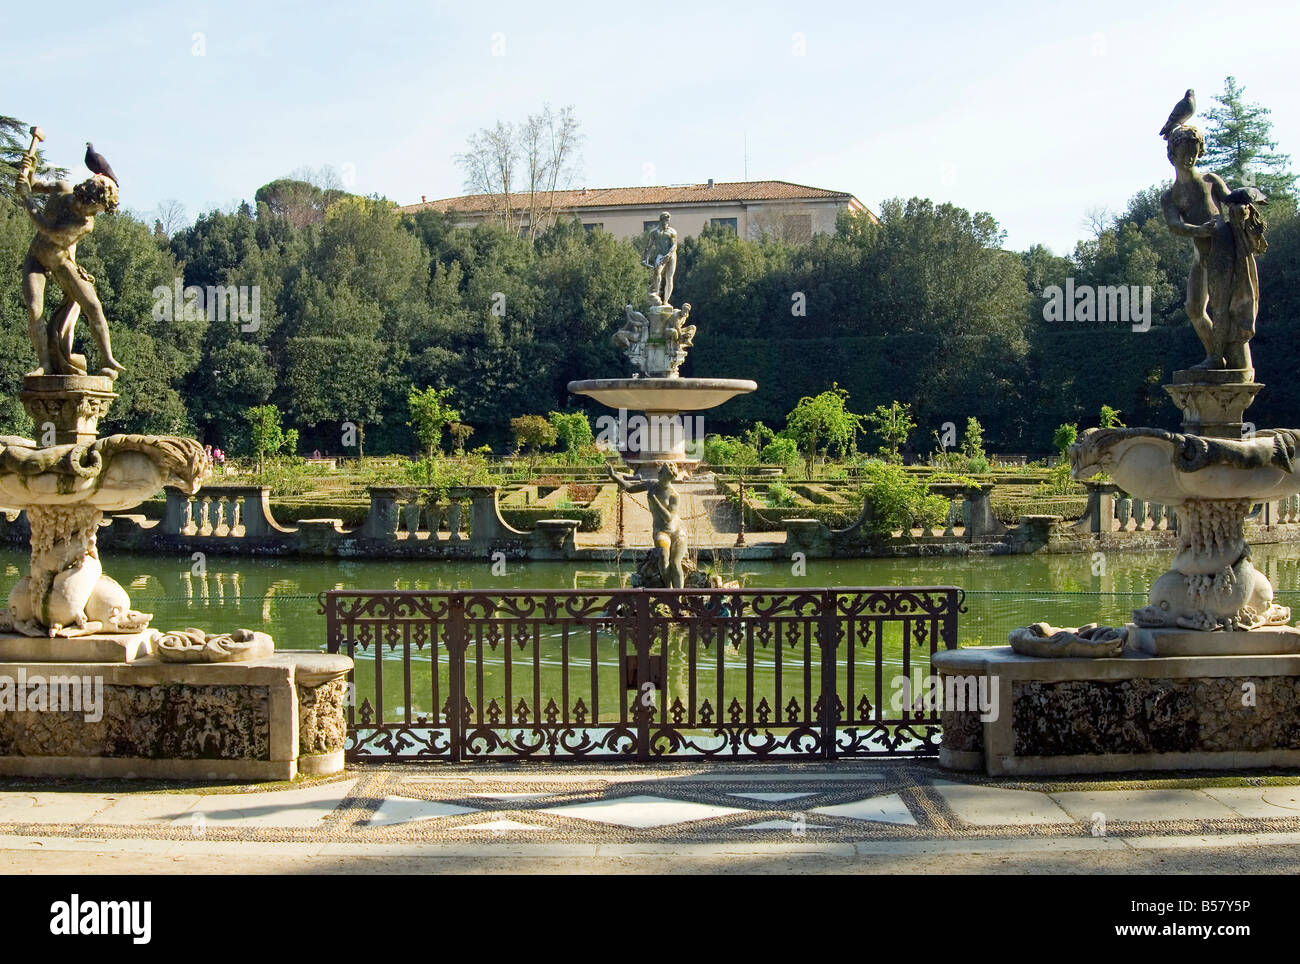 Vasca dell'Isola, (Island Pond), puttos statues in front of Ocean's Fountain, Boboli Gardens, Florence, Tuscany, Italy, Europe Stock Photo